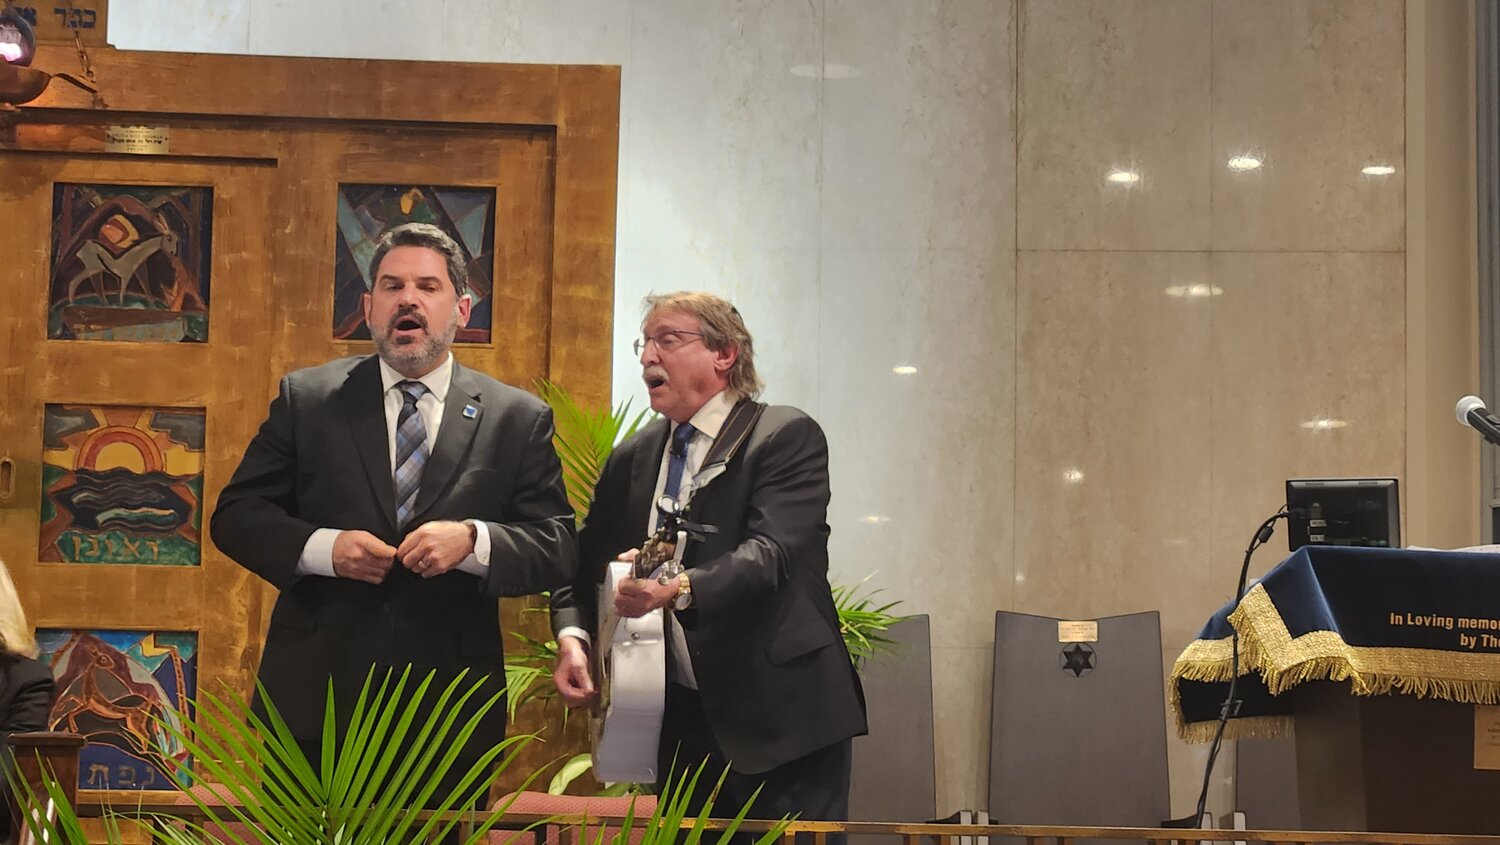 Rabbis Michael Churgel, left, and Irwin Huberman united their congregations to provide a space for healing and community in the aftermath of the Hamas terrorist attacks.